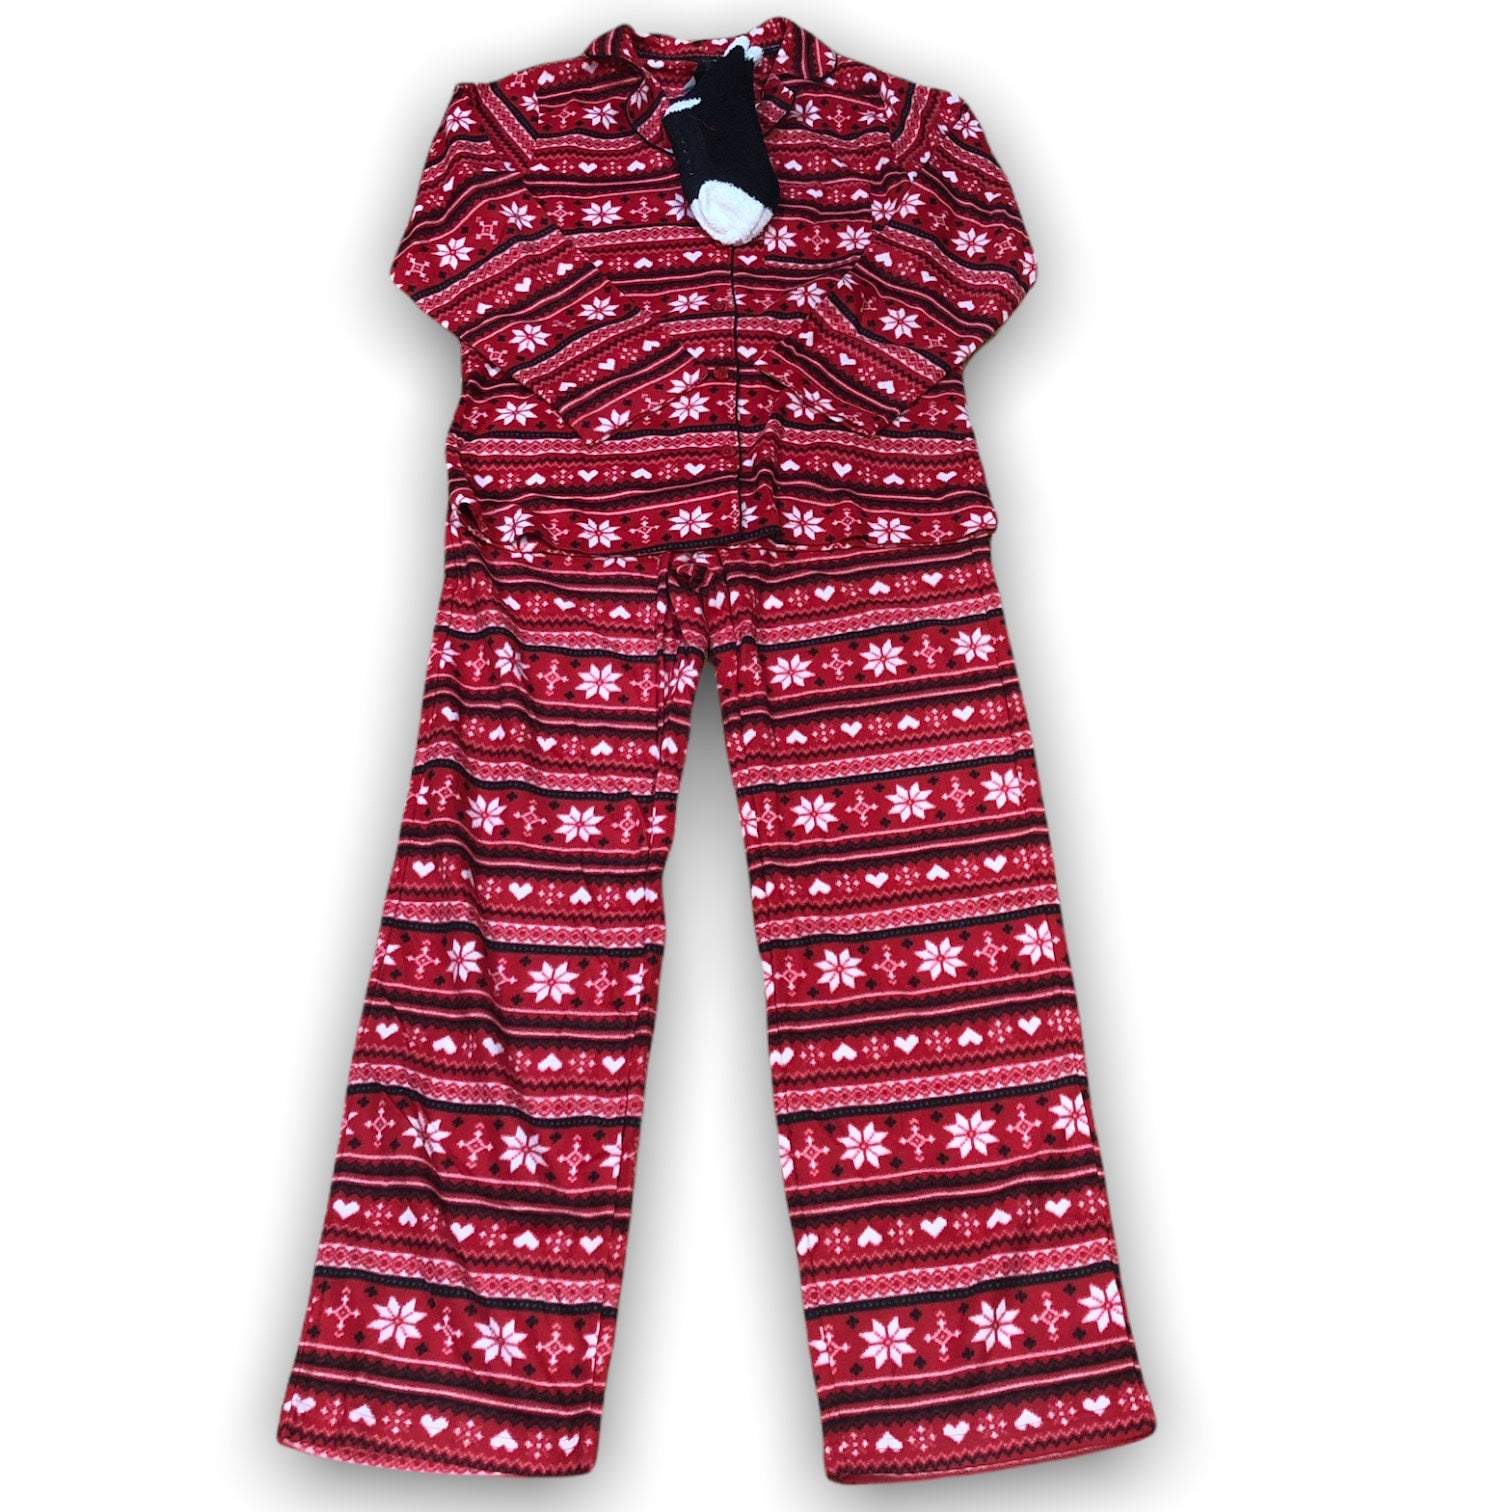 BULK BUY - Women's Three Piece Micropolar Notched Pajama Set with Socks (GIFT PACKAGED)(6-Pack)